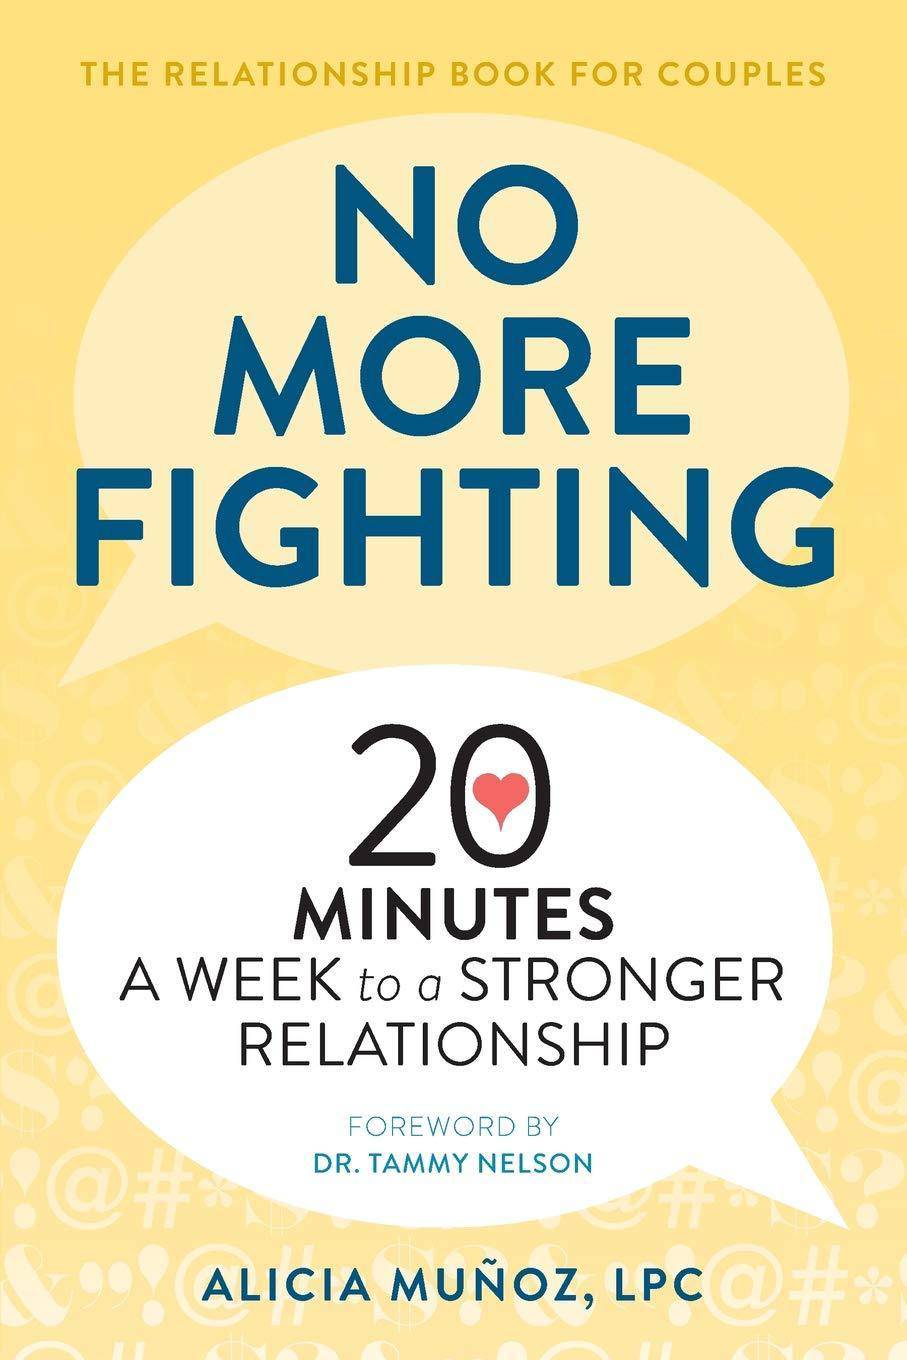 No More Fighting: The Relationship Book for Couples - SureShot Books Publishing LLC